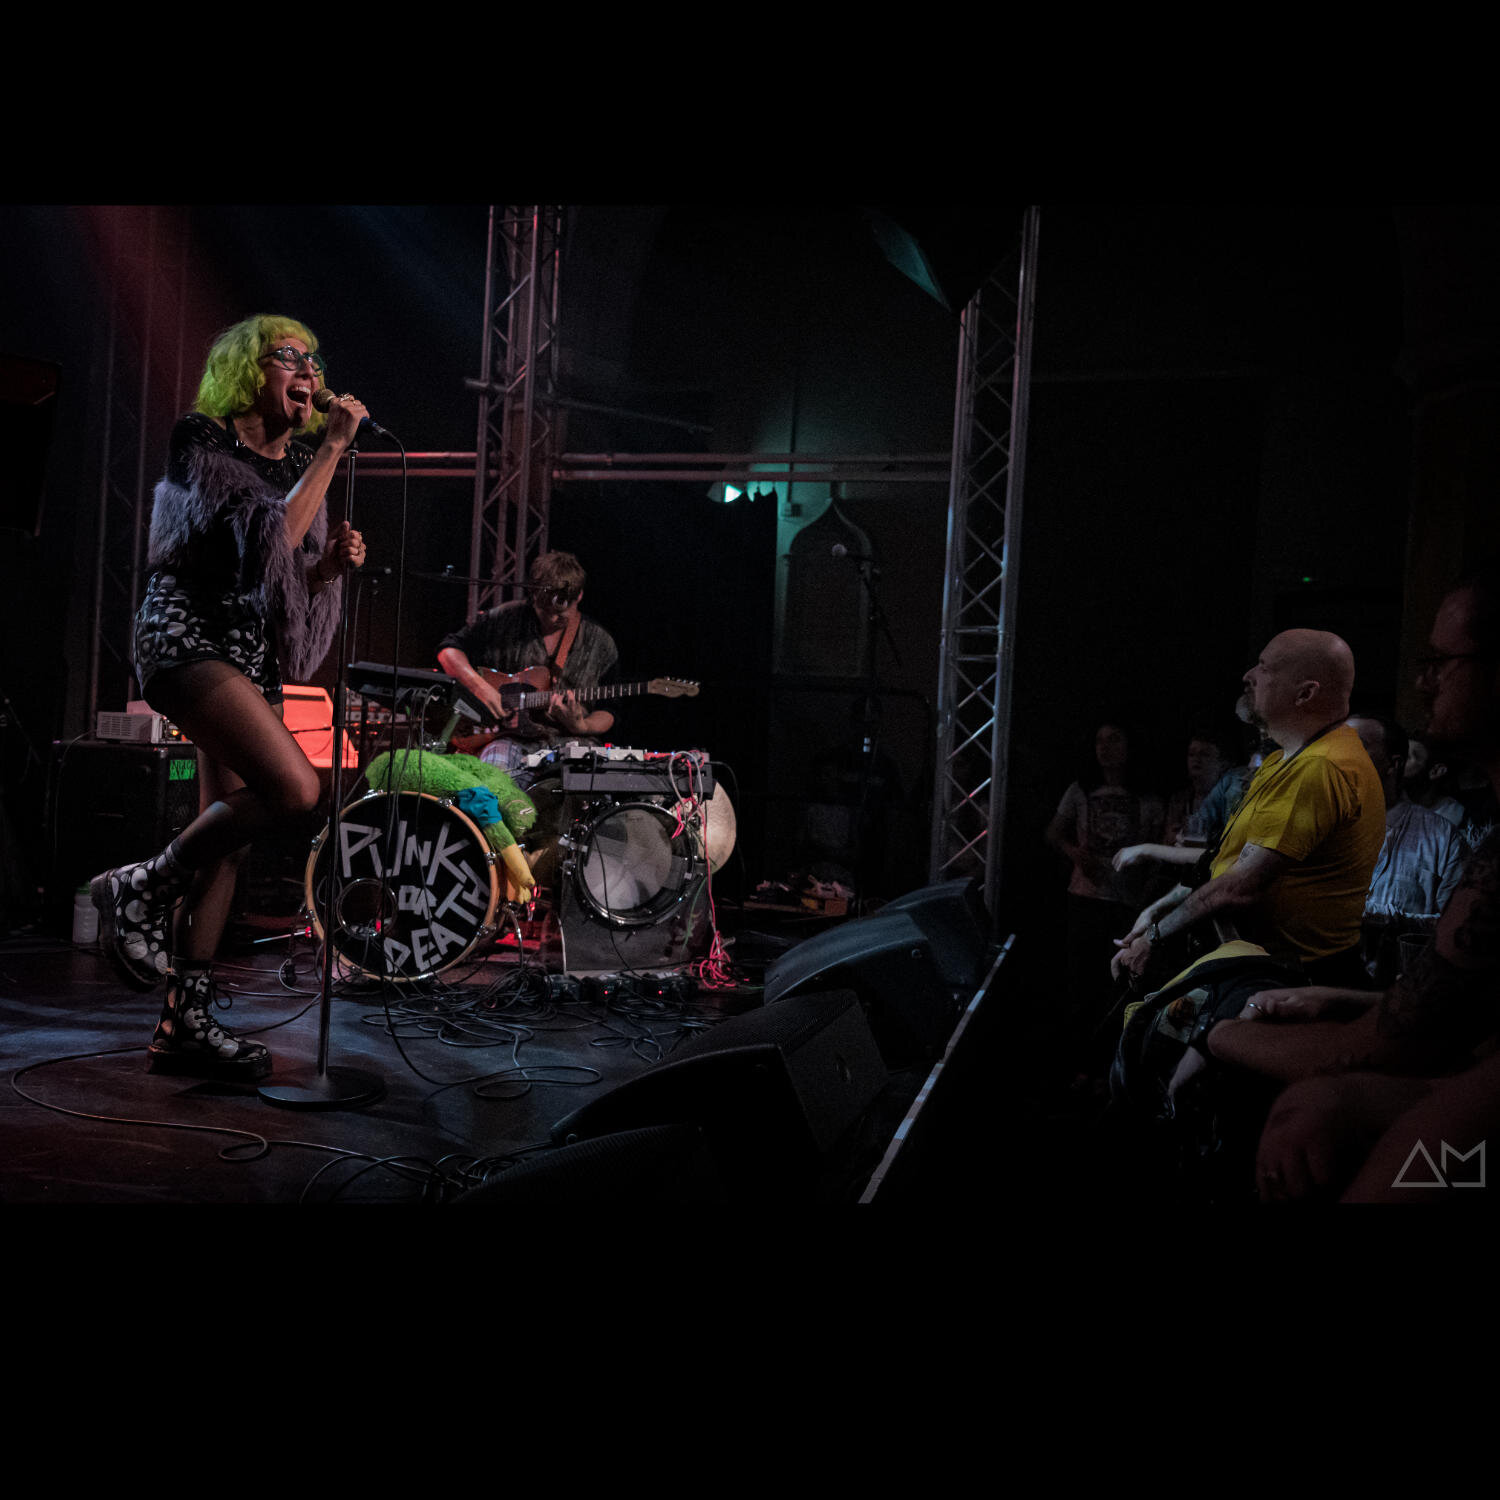 Our gig at the @norwichartscentre a few weeks back was truly an amazing moment for us, we're still buzzing! Thanks again to @dampmatches &amp; @femmedeband for killing it, never gonna forget that night!🤘Here's some gorgeous photos from the event, ta